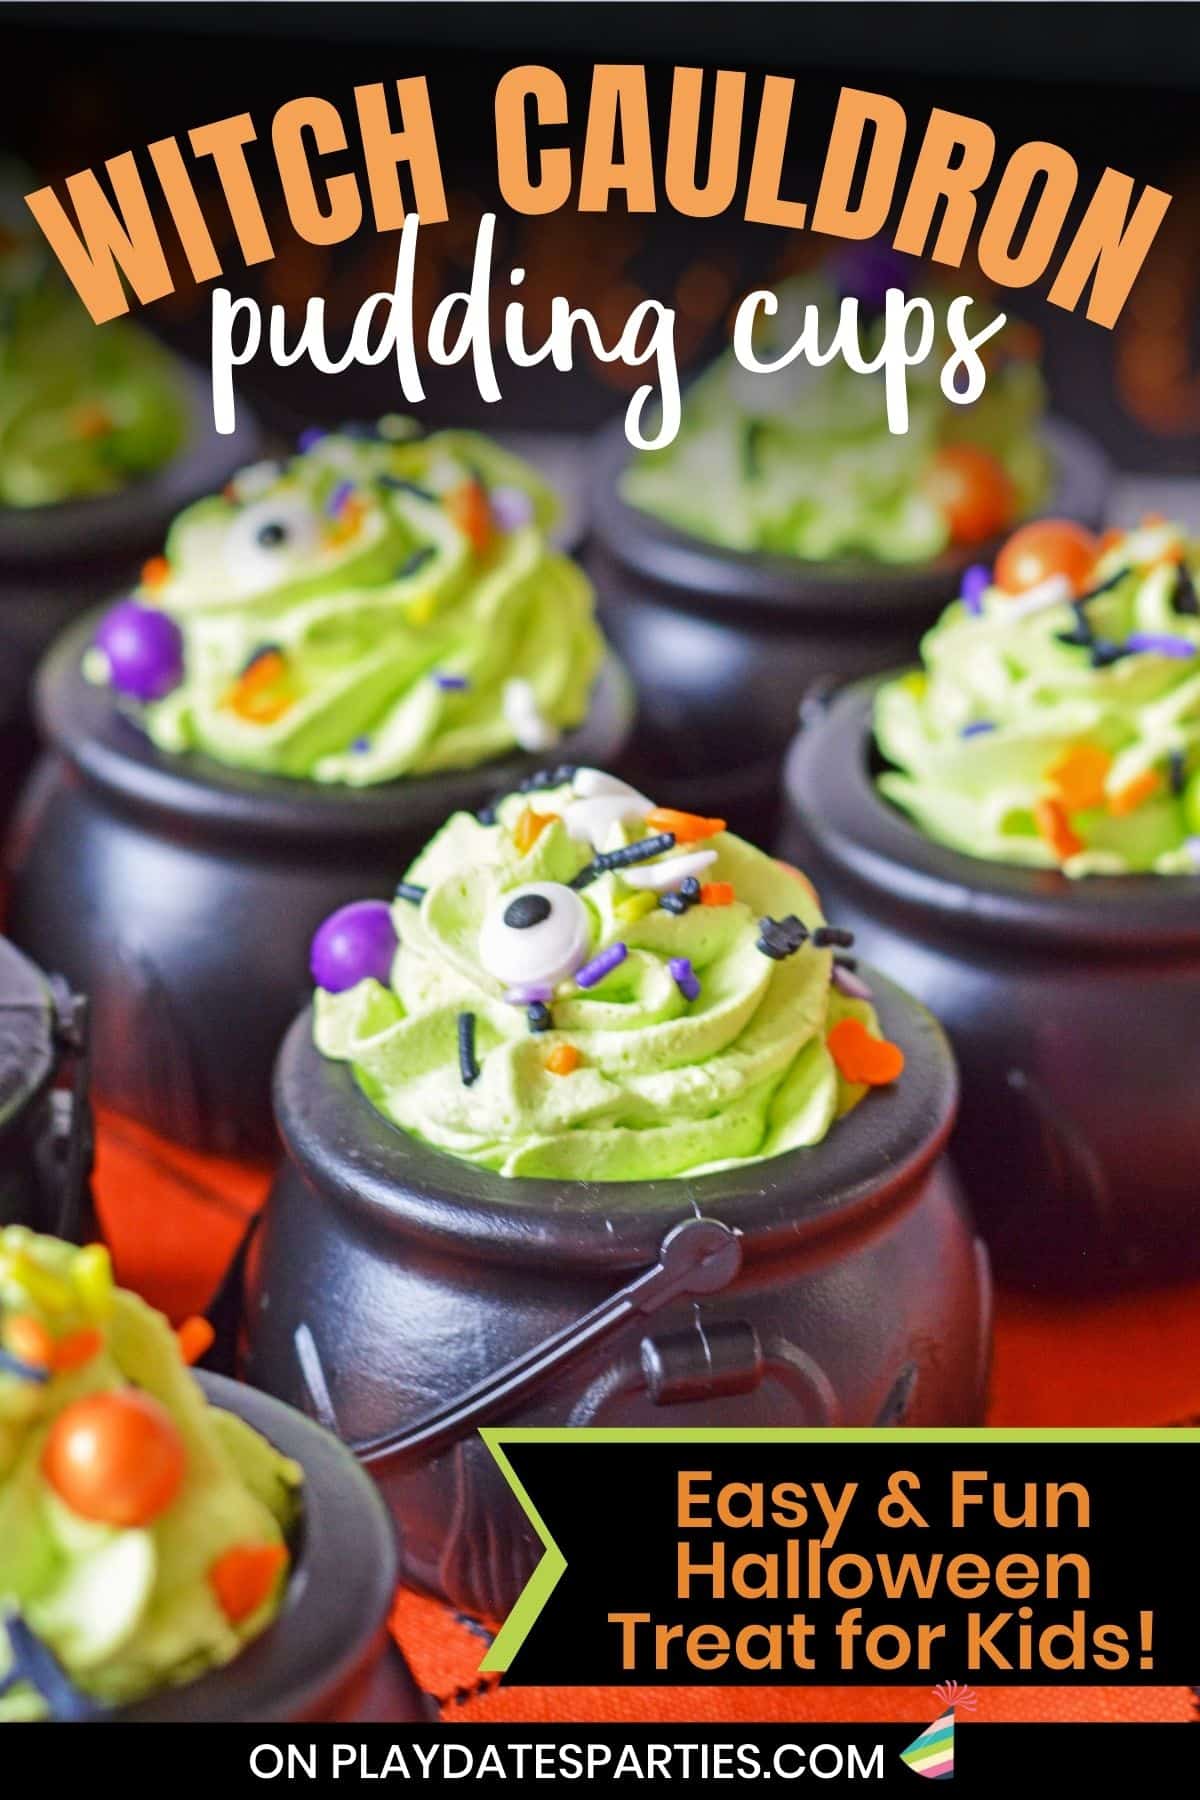 Halloween treats on a table with text overlay Witch Cauldron pudding cups easy and fun Halloween treat for kids.